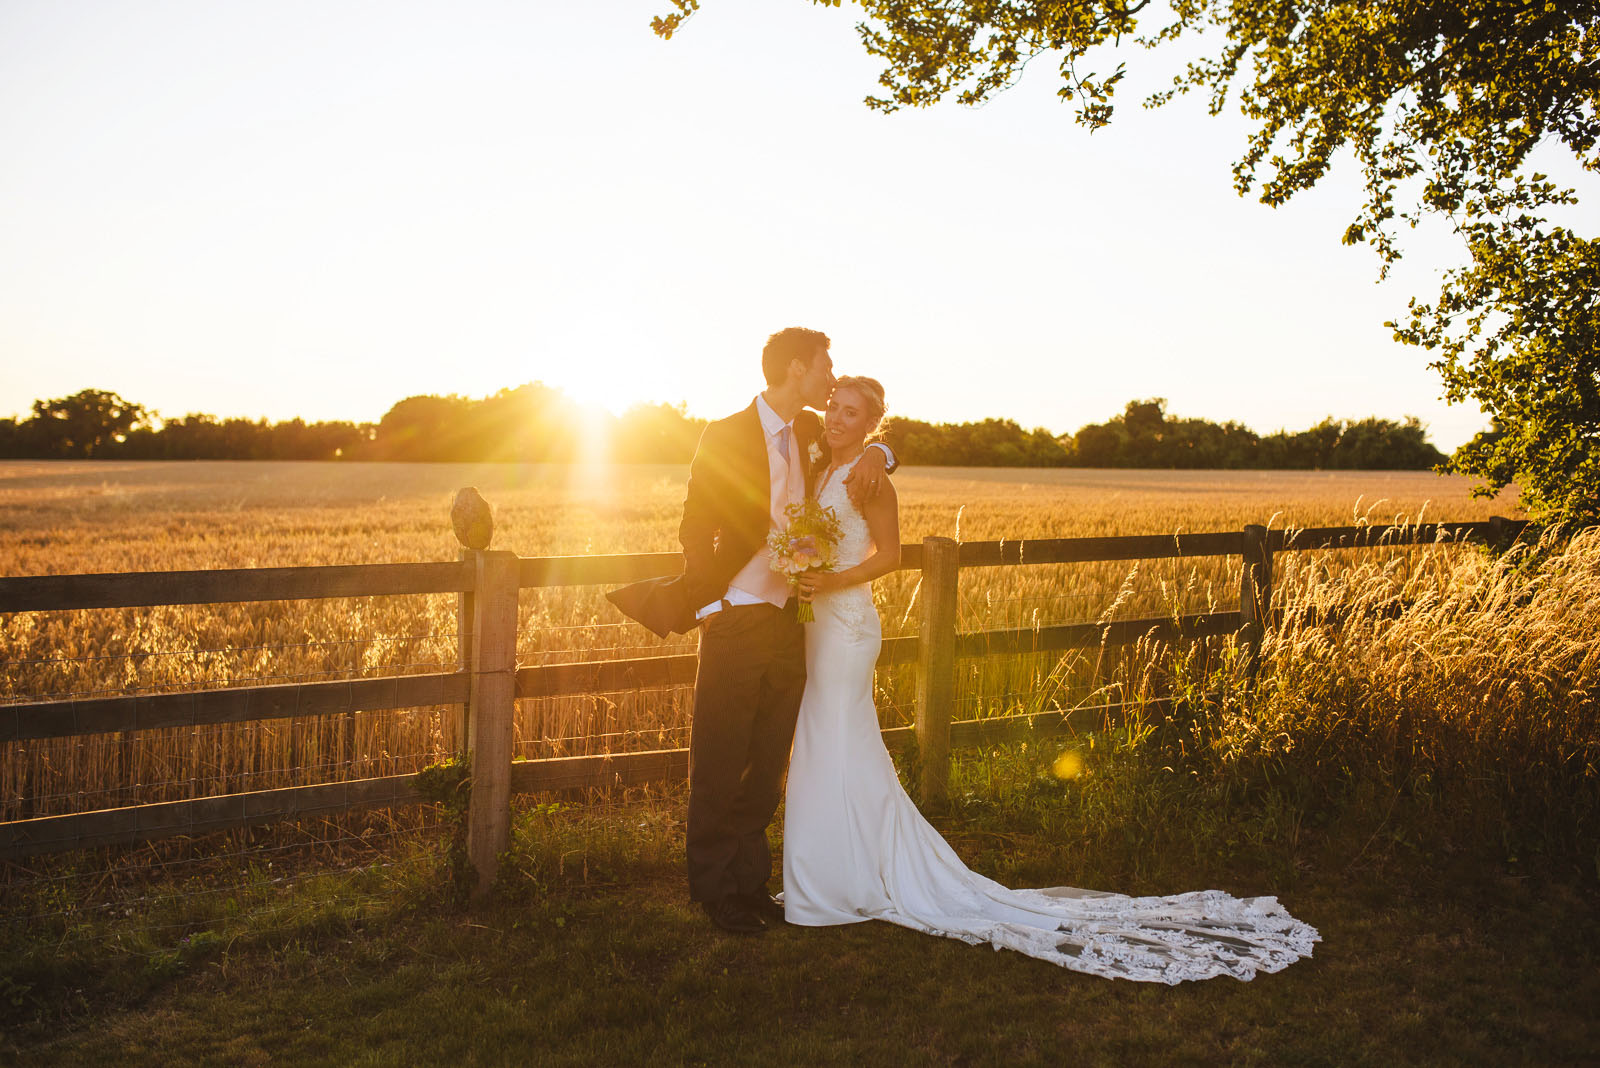 Hampshire wedding photographs taken by a corn field at sunset.